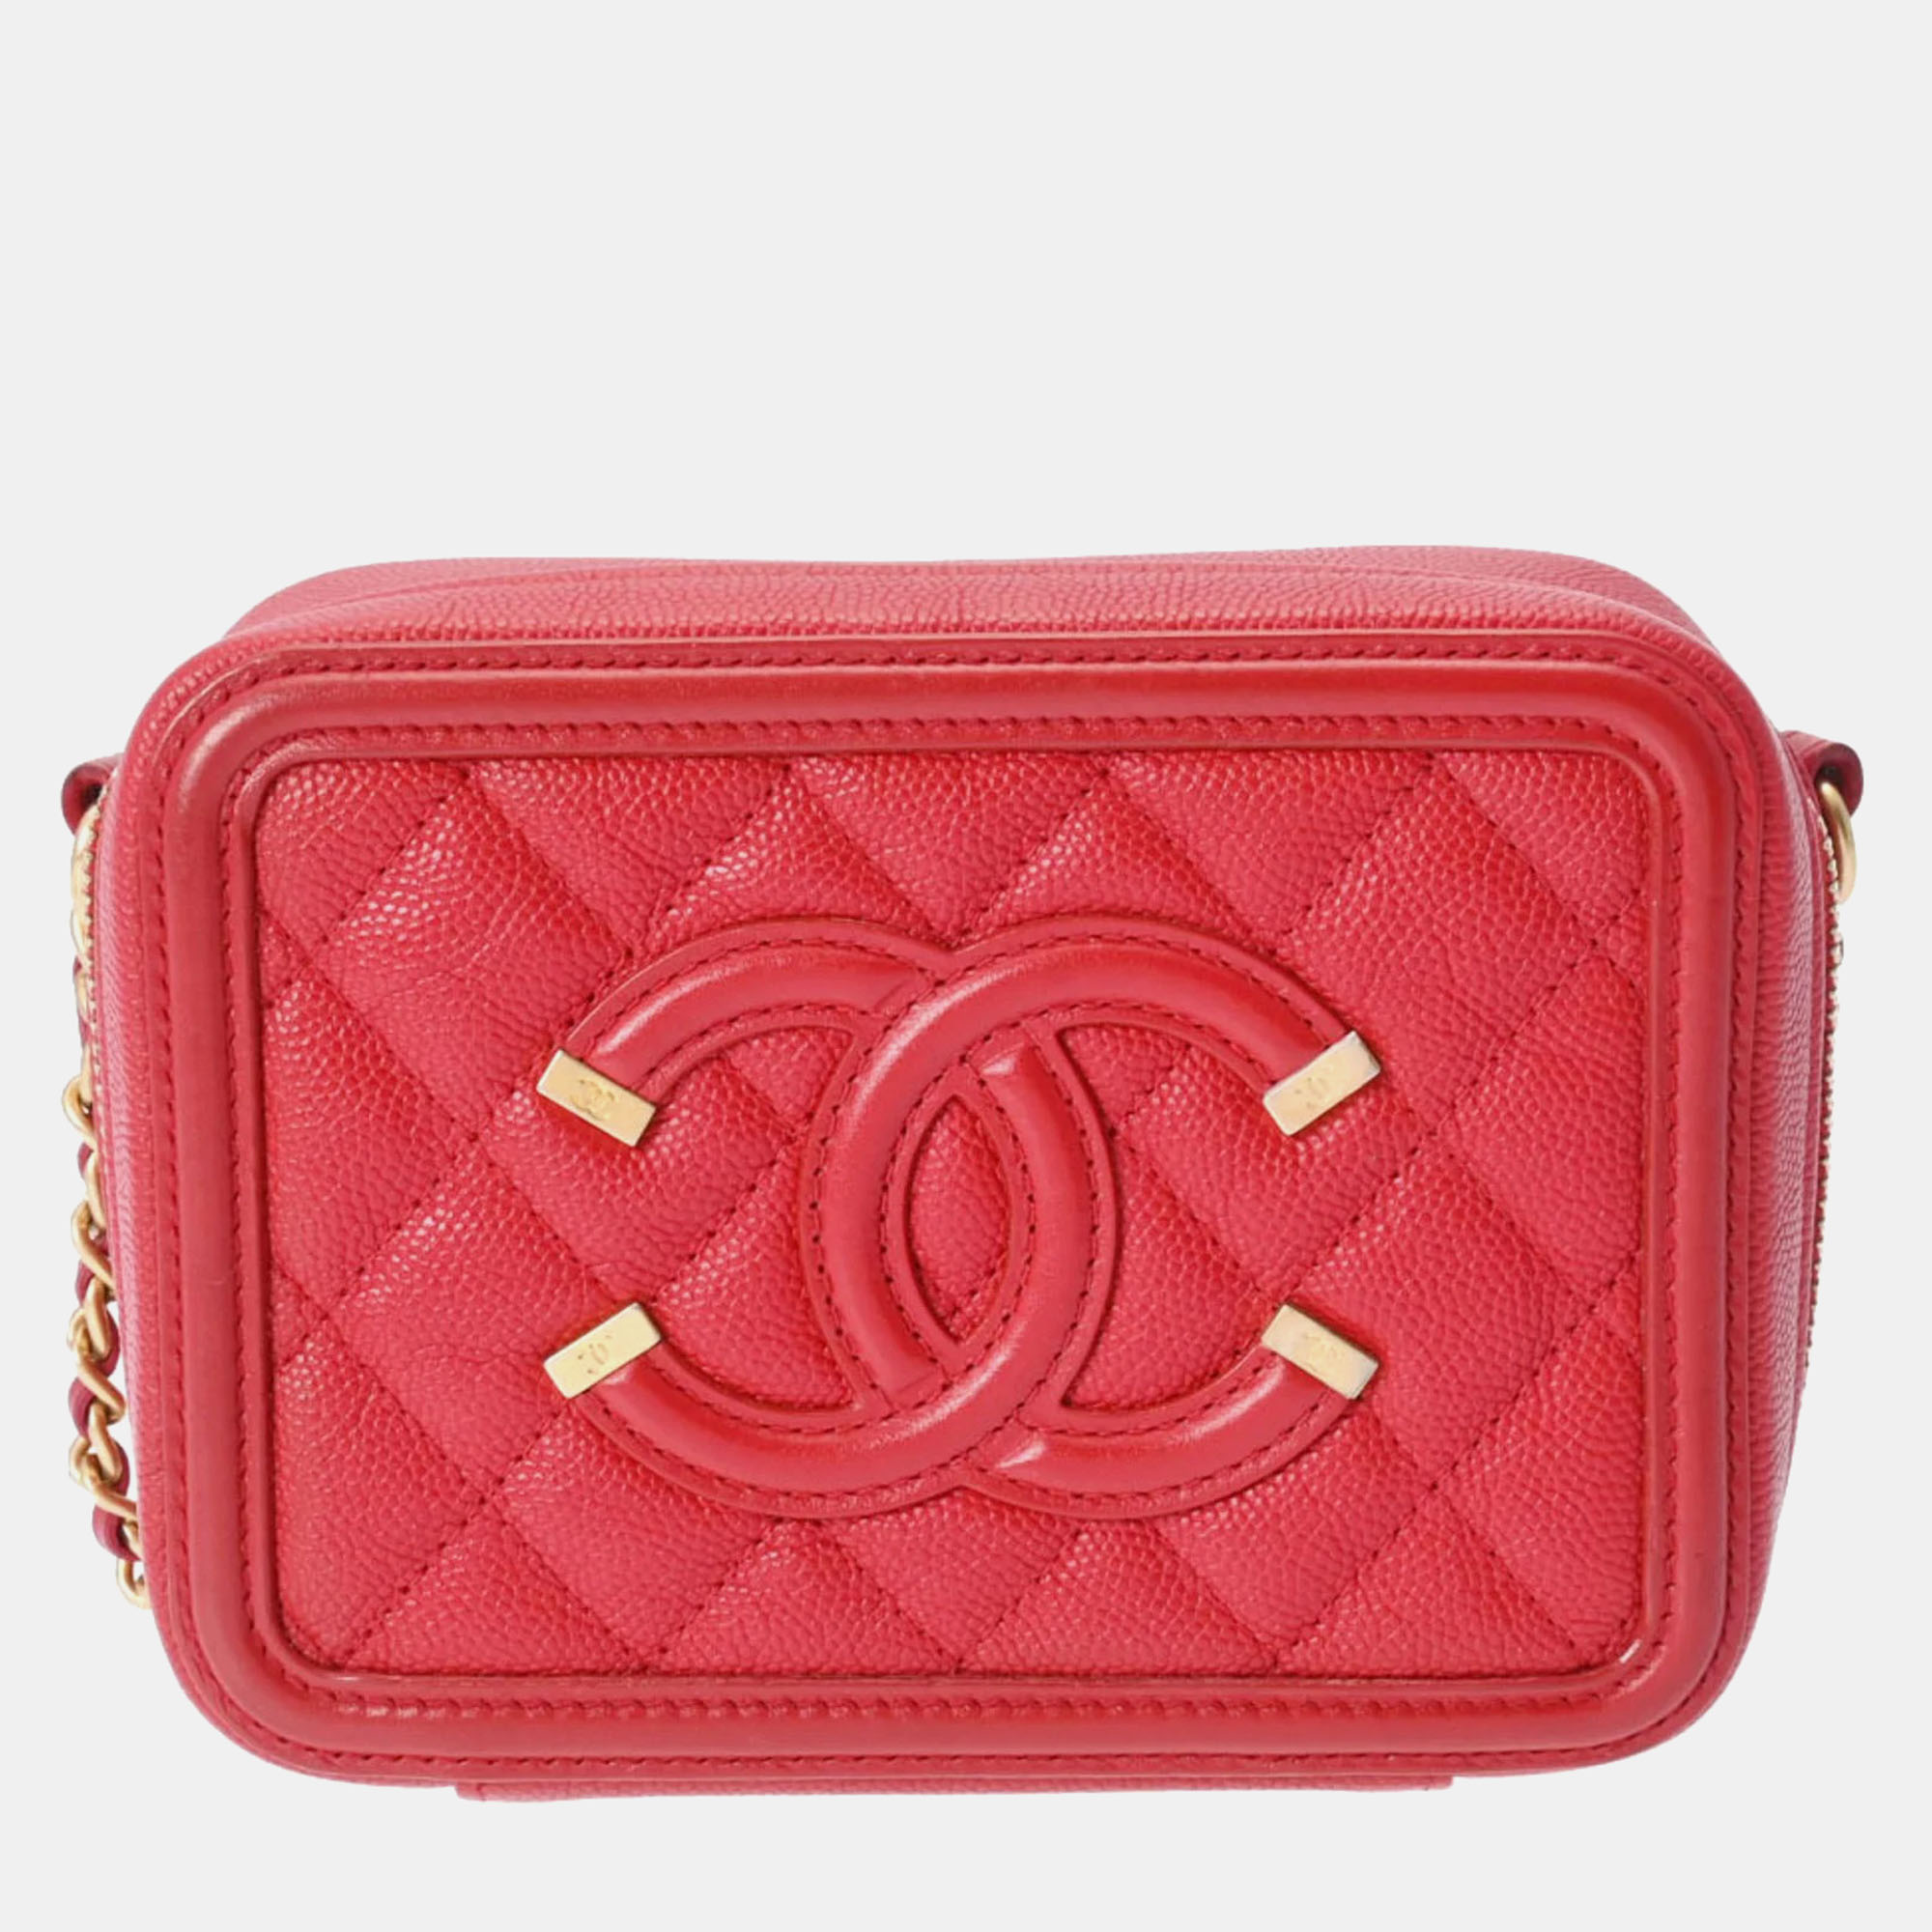 Experience luxury with this Chanel shoulder bag. Meticulously crafted with the best materials its a timeless piece that will elevate any outfit.